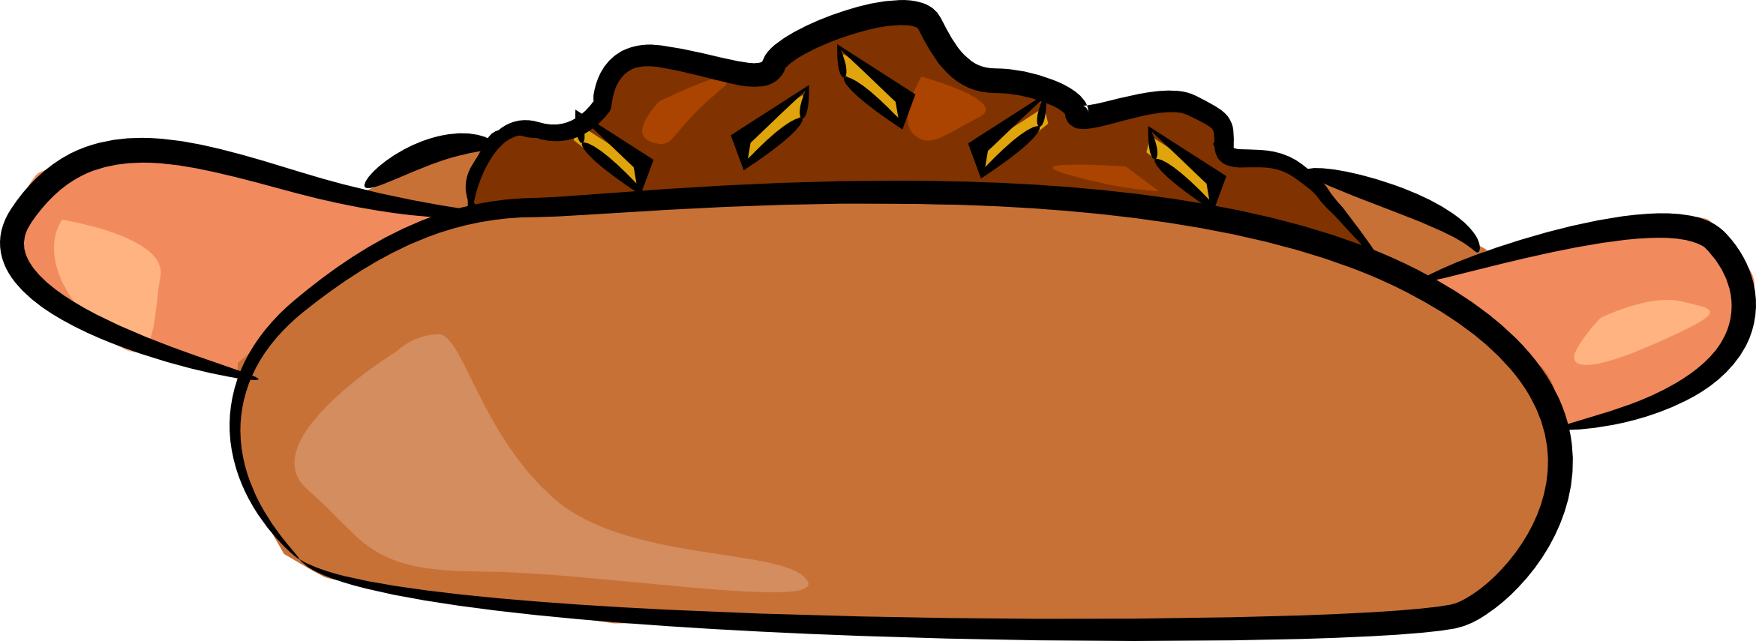 Chili free to use clipart image